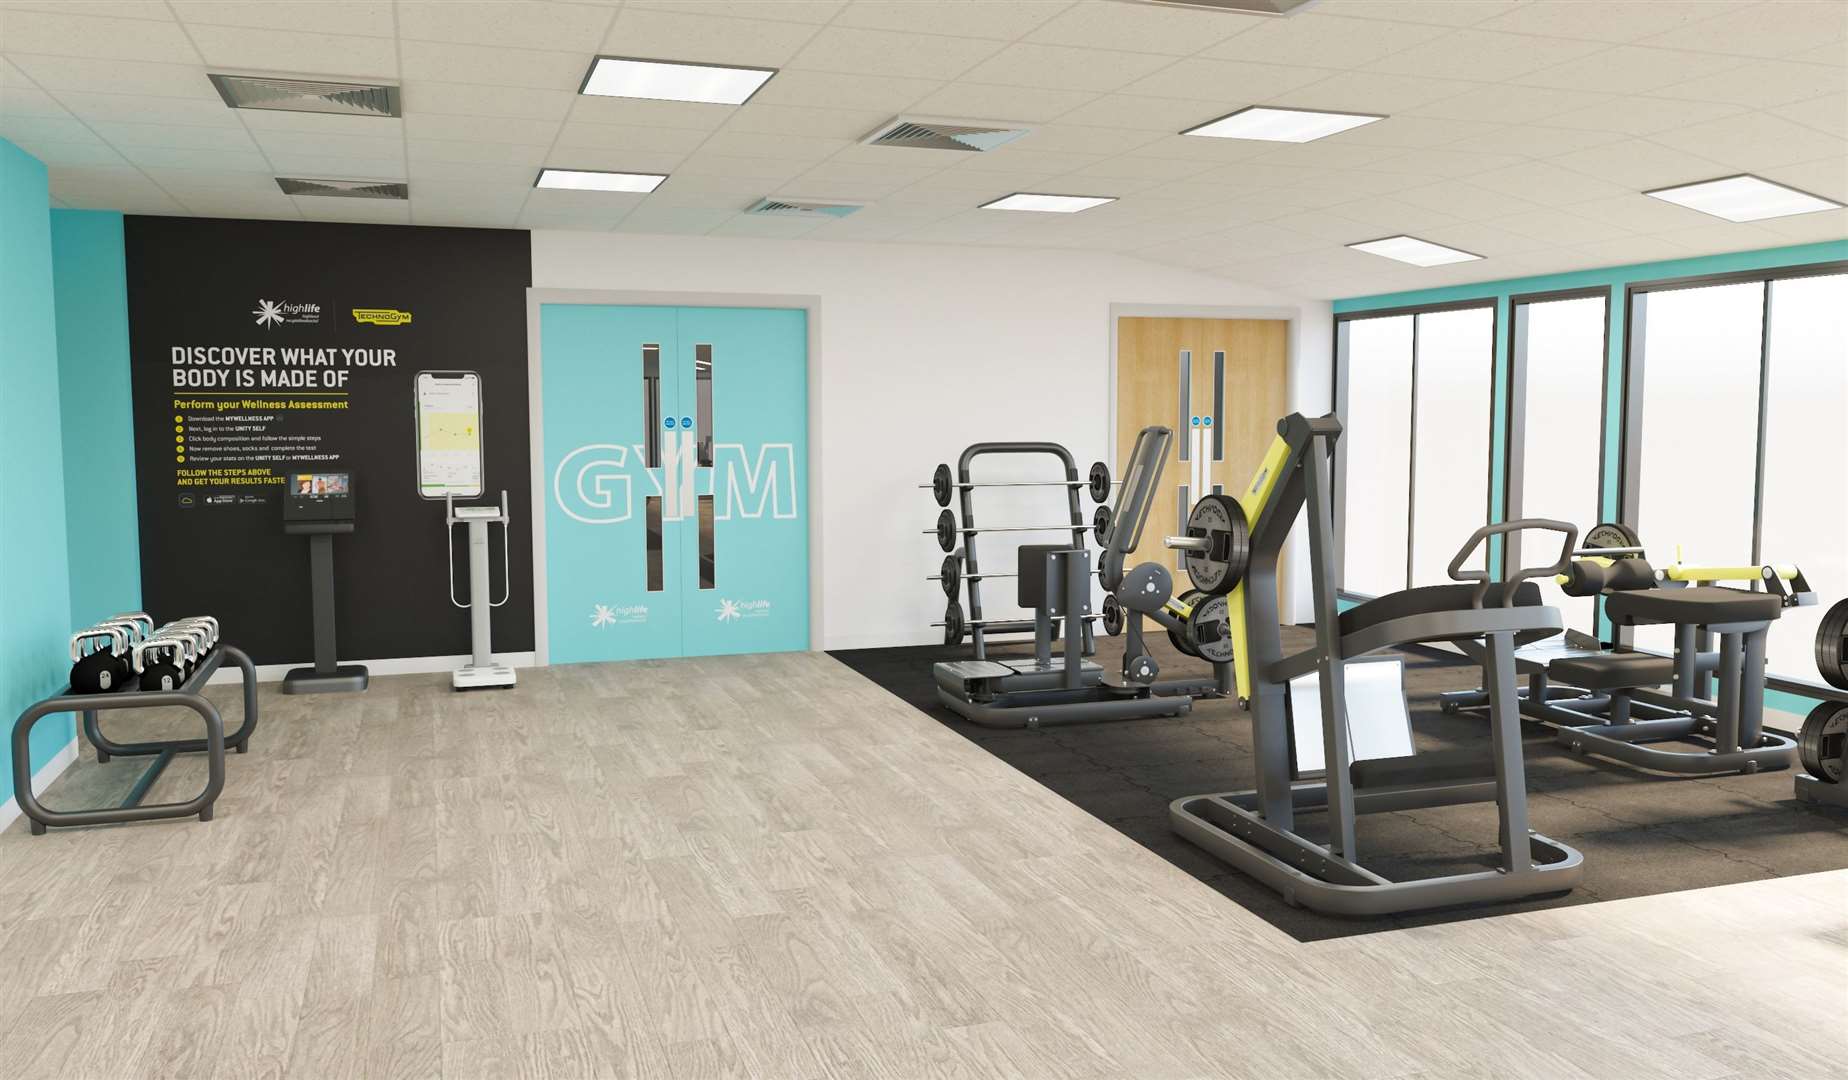 Visualisation of how Inverness Leisure will look after its refurbishment.